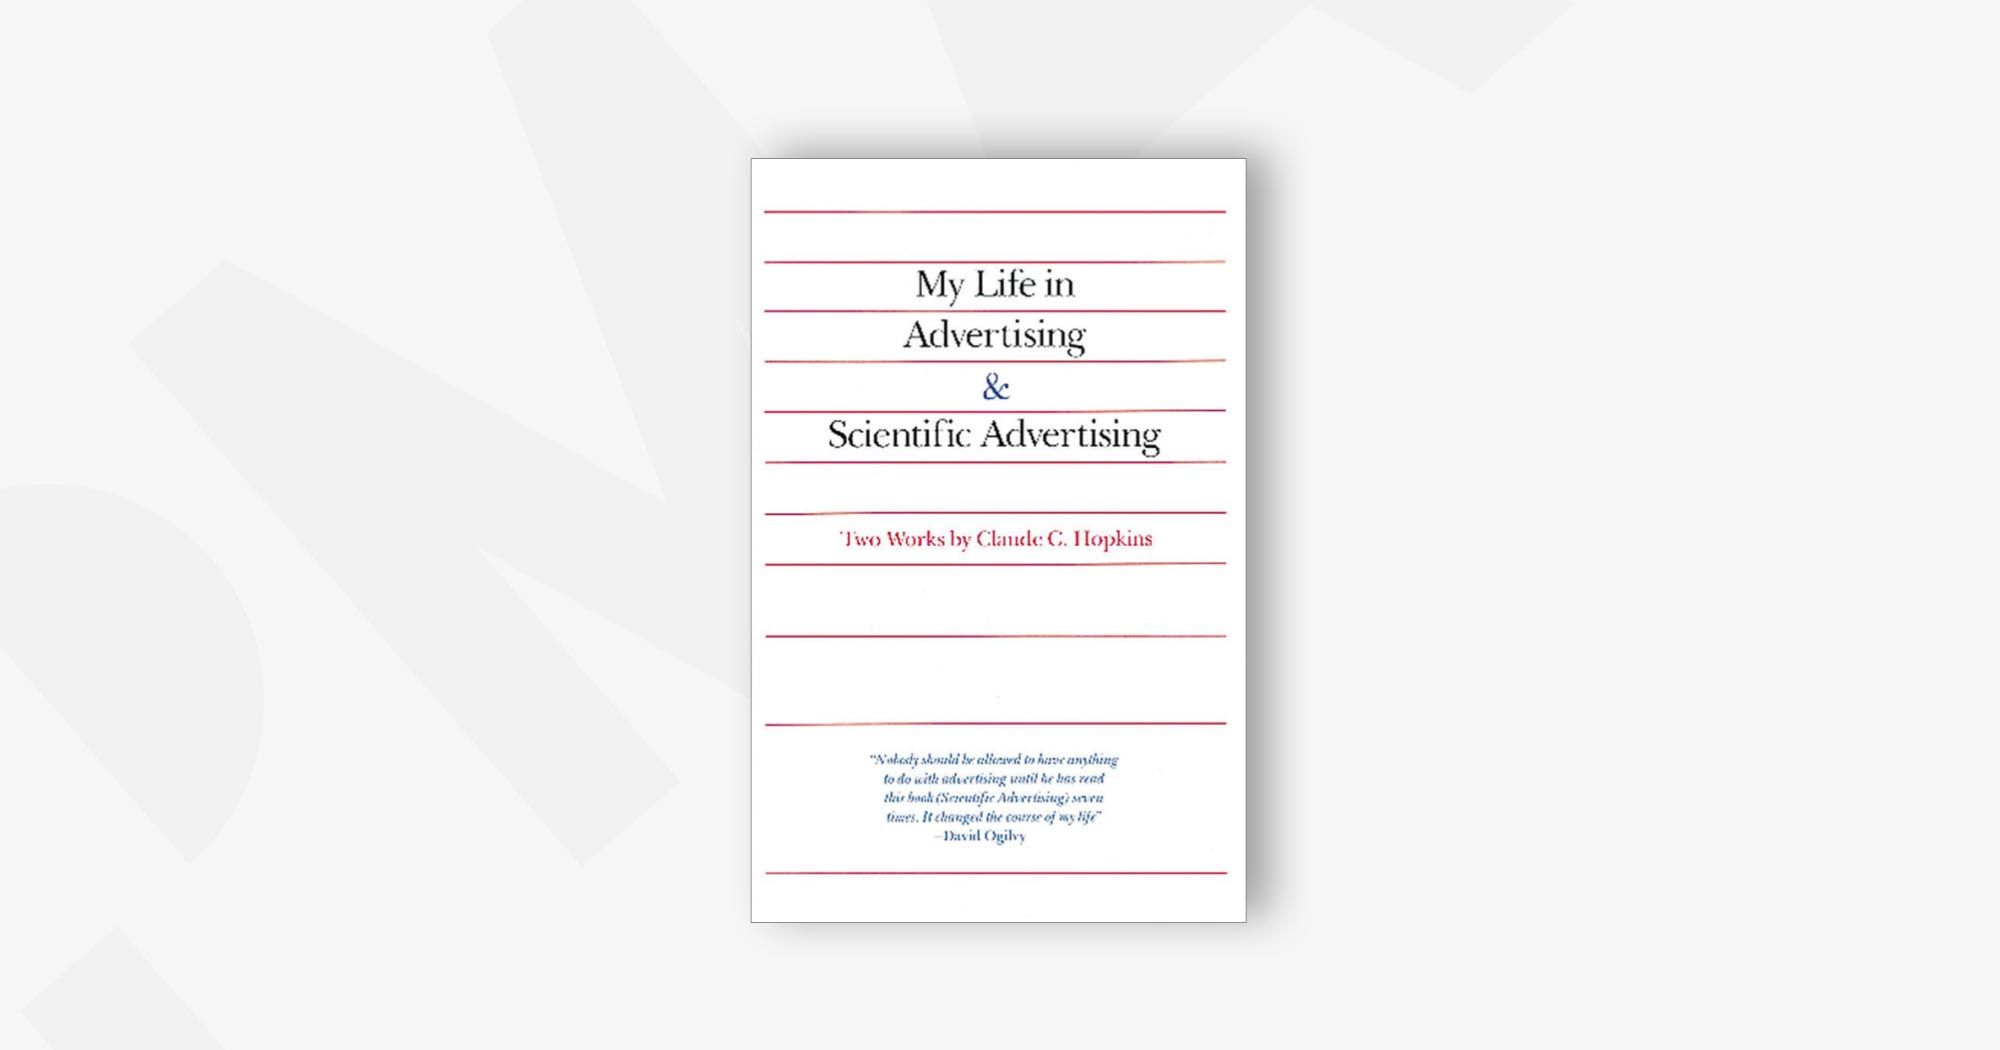 My Life in Advertising and Scientific Advertising – Claude Hopkins